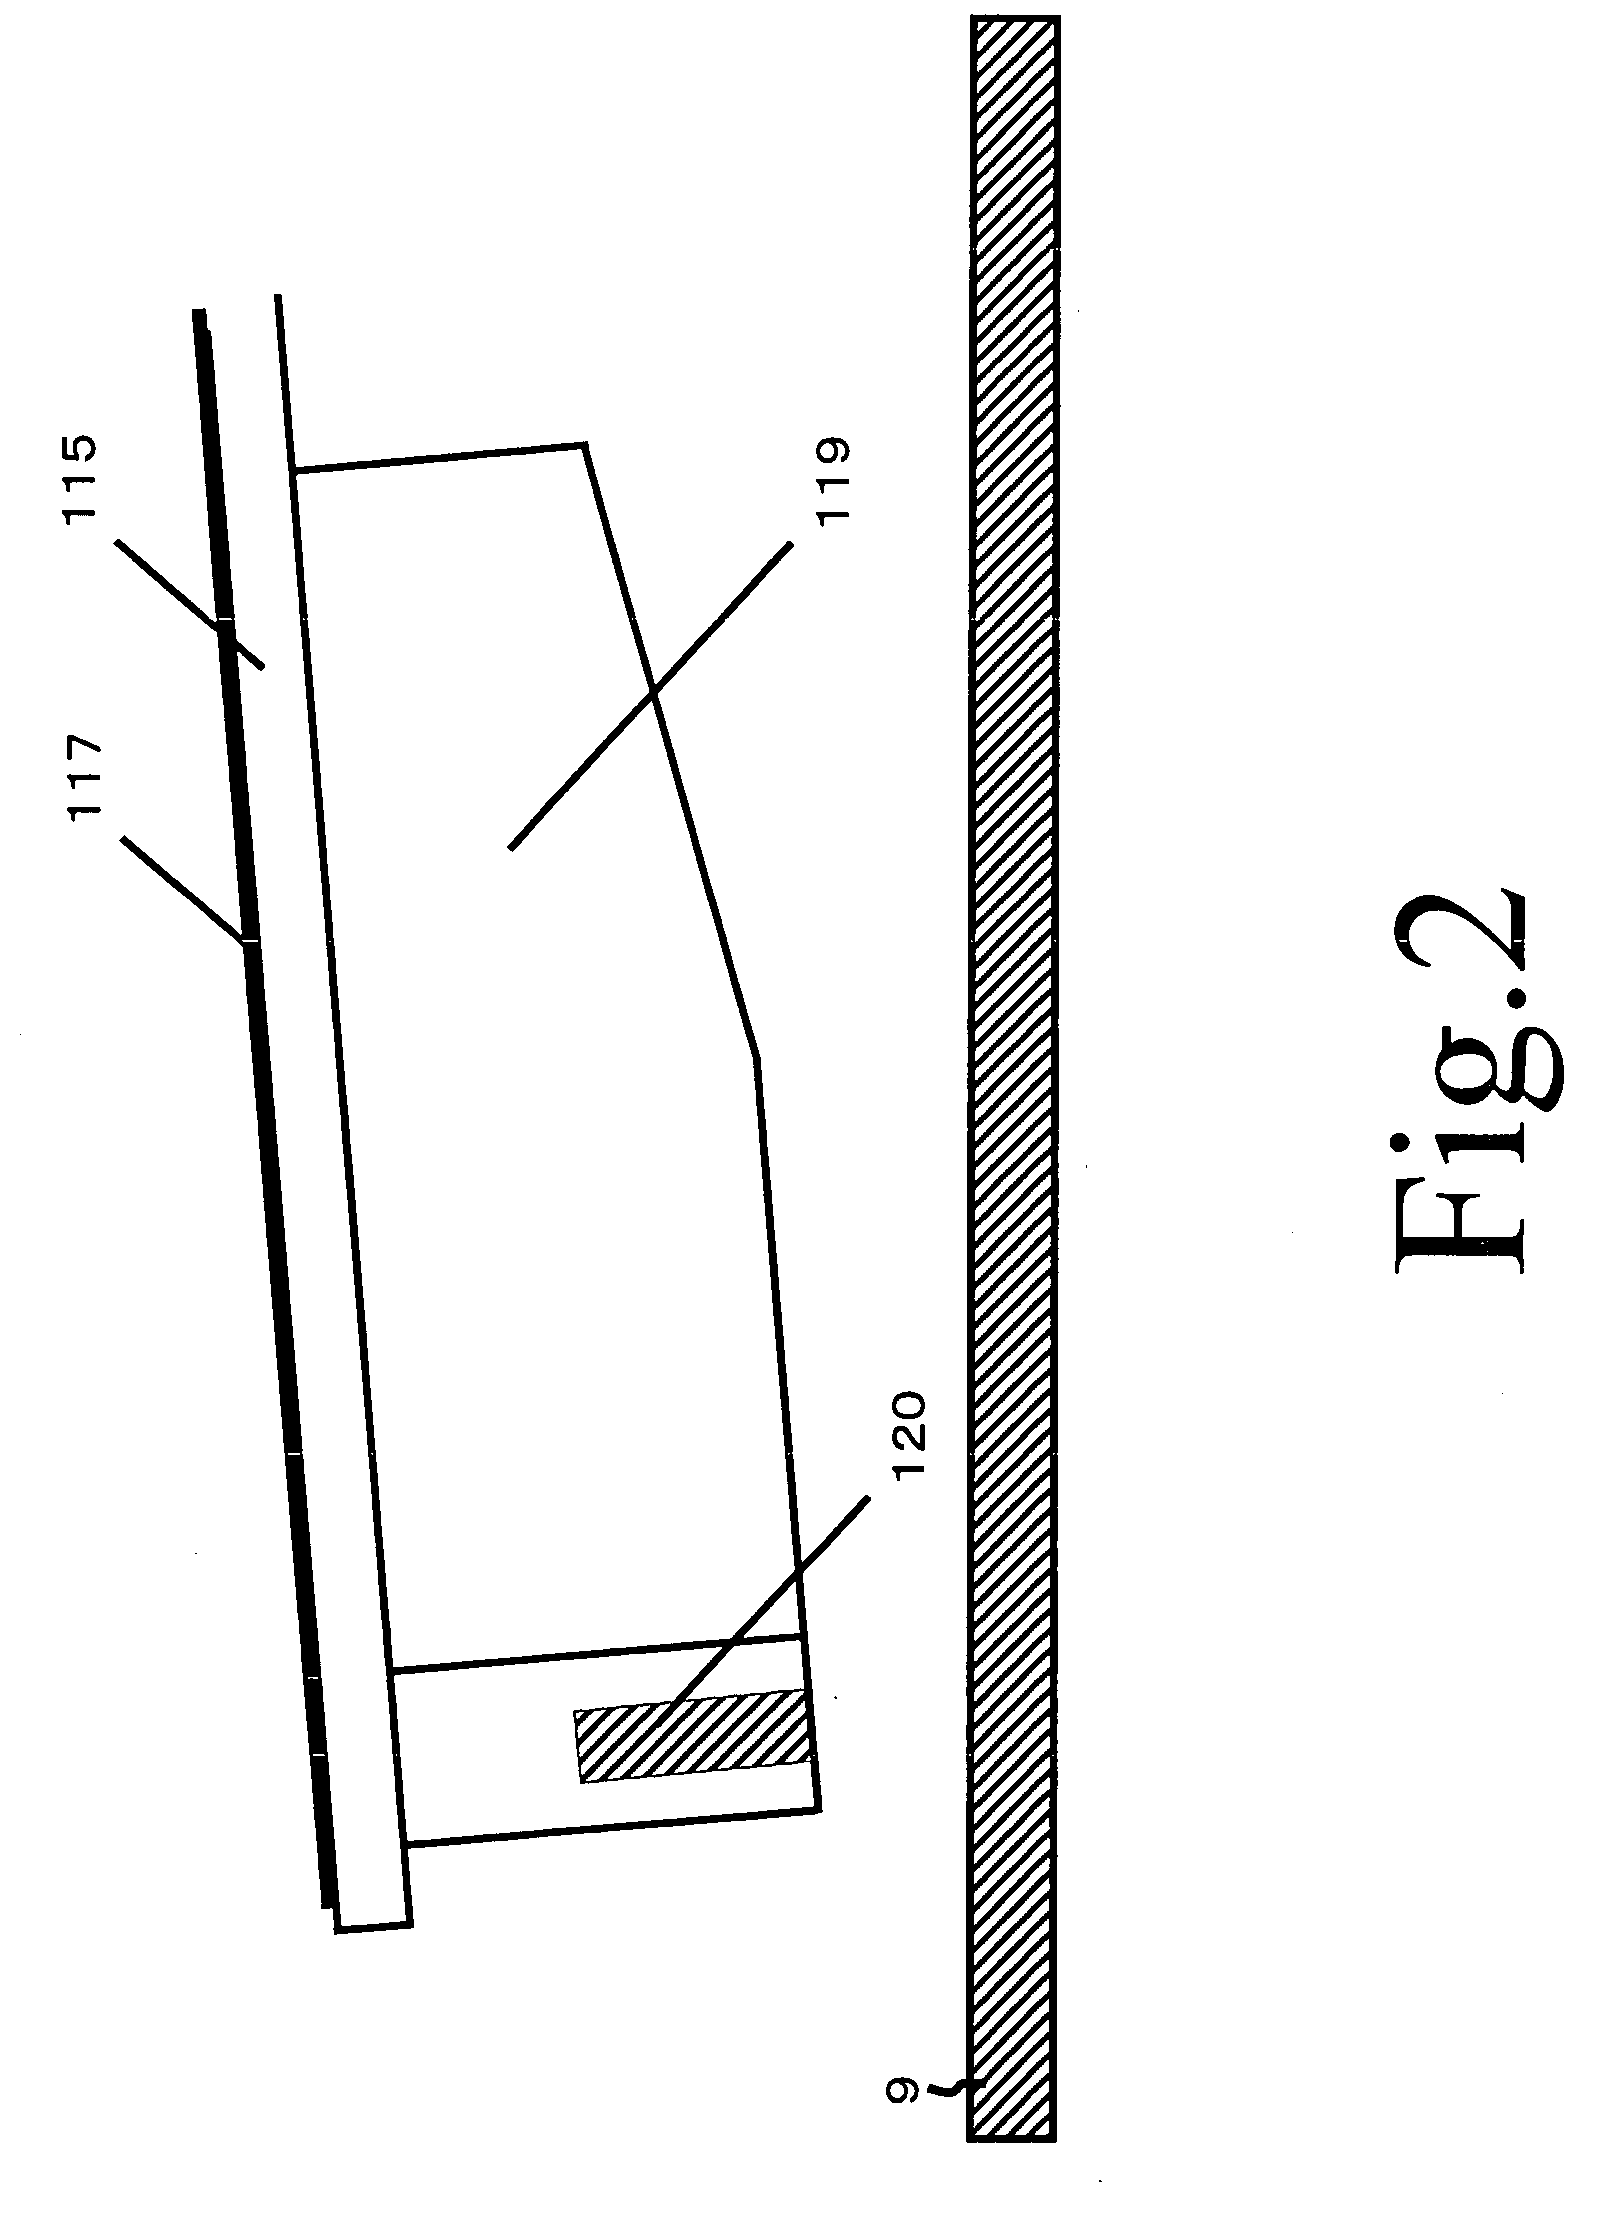 Magnetic sensor and memory device